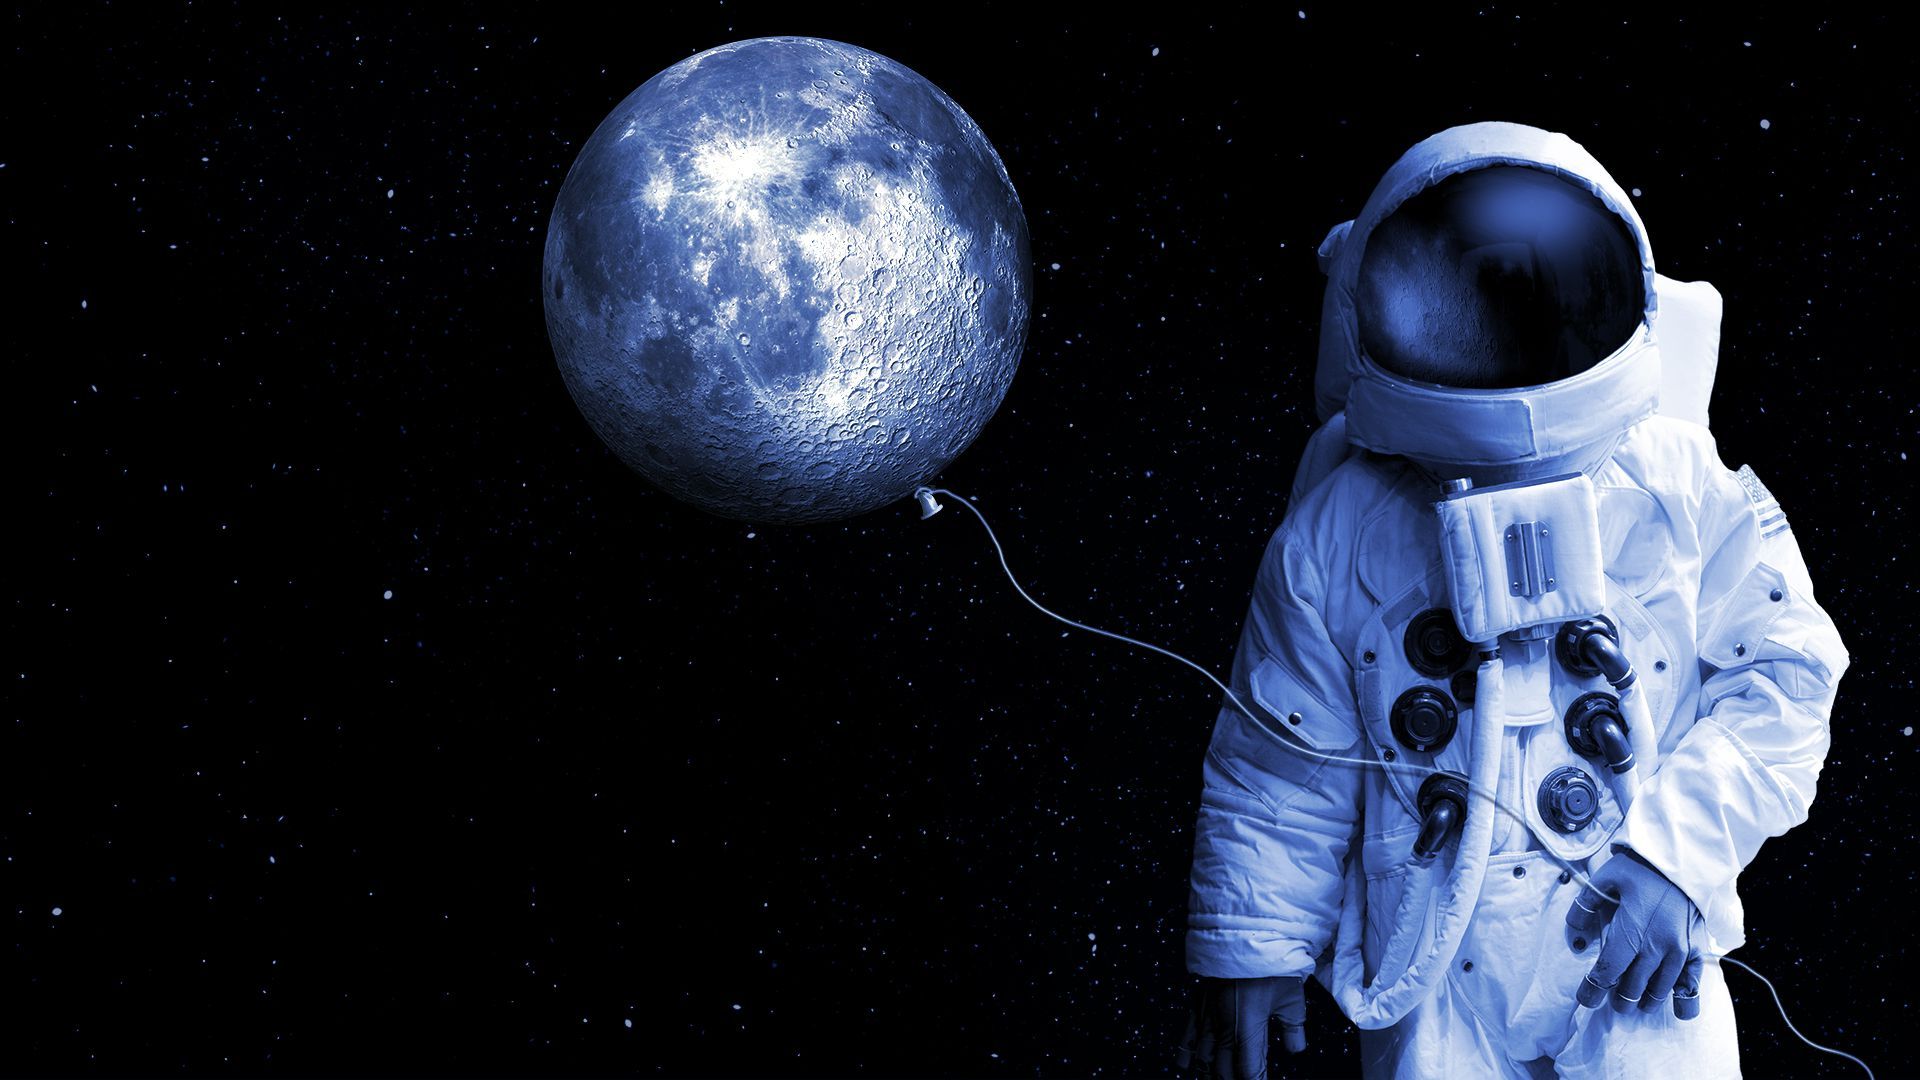 Illustration of an astronaut holding a balloon made of the moon.